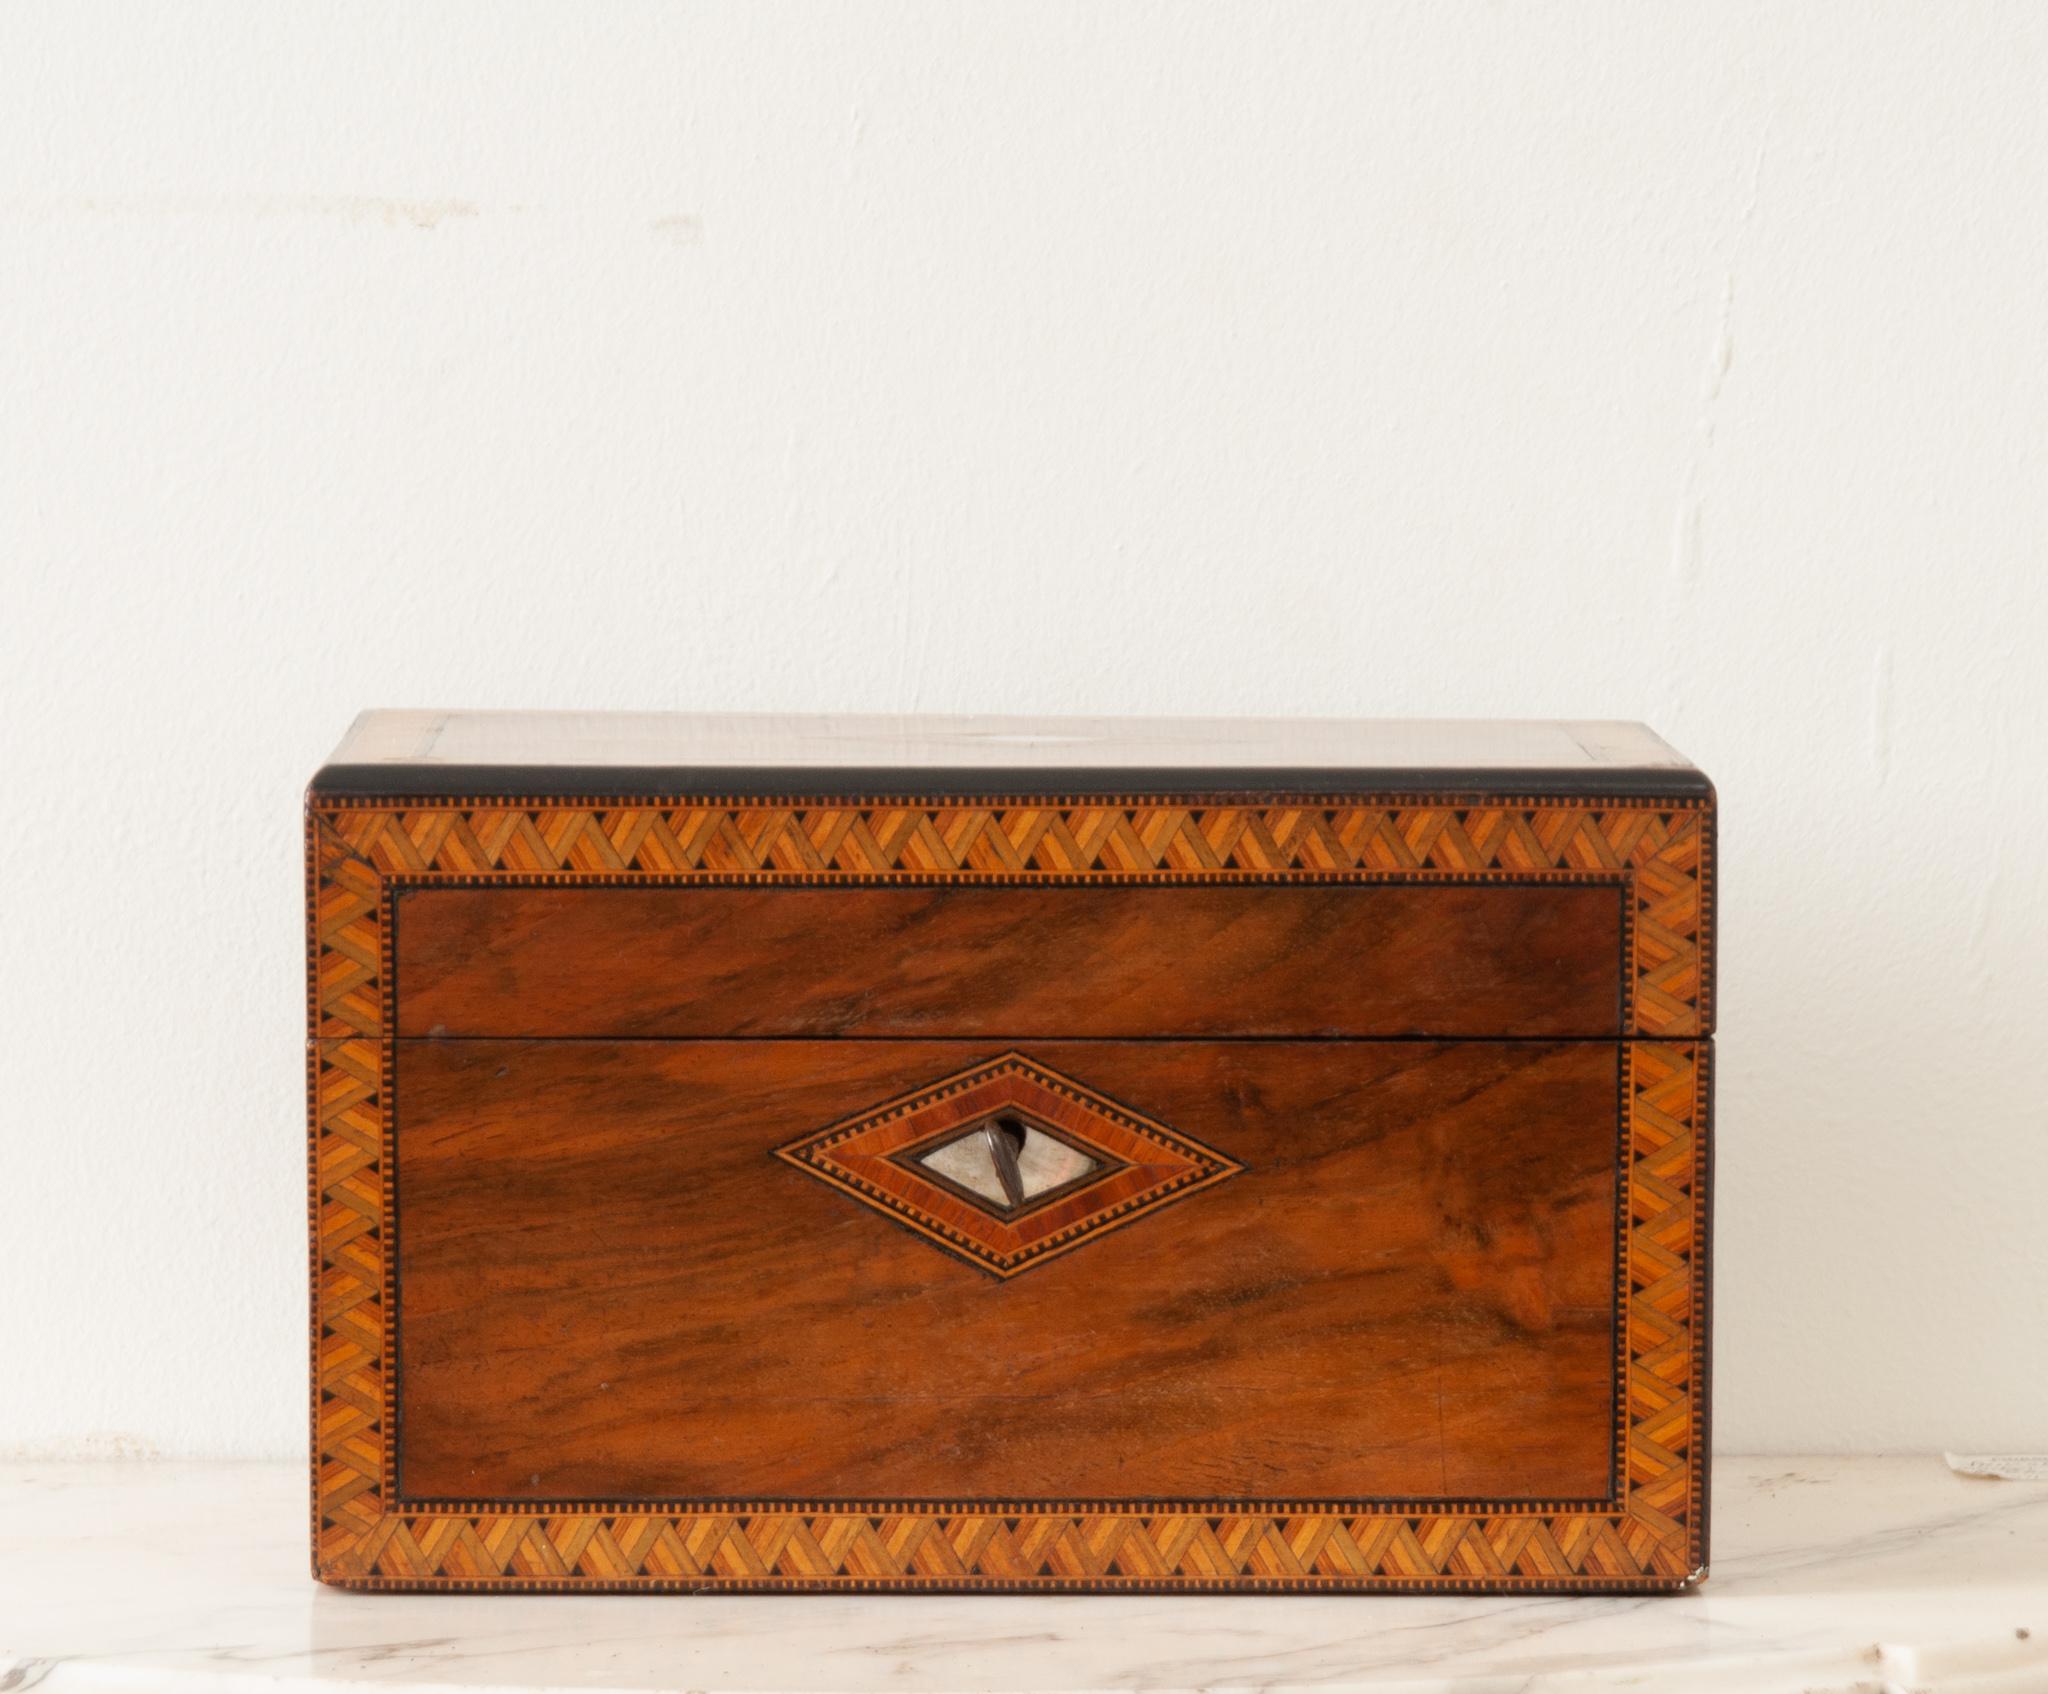 An English 19th Century mahogany tea caddy with diamond shaped mother-of-pearl inlay surrounded by a marquetry pattern of satin wood, mahogany and ebonized wood. The top and the front facade of the box are surrounded with geometric marquetry